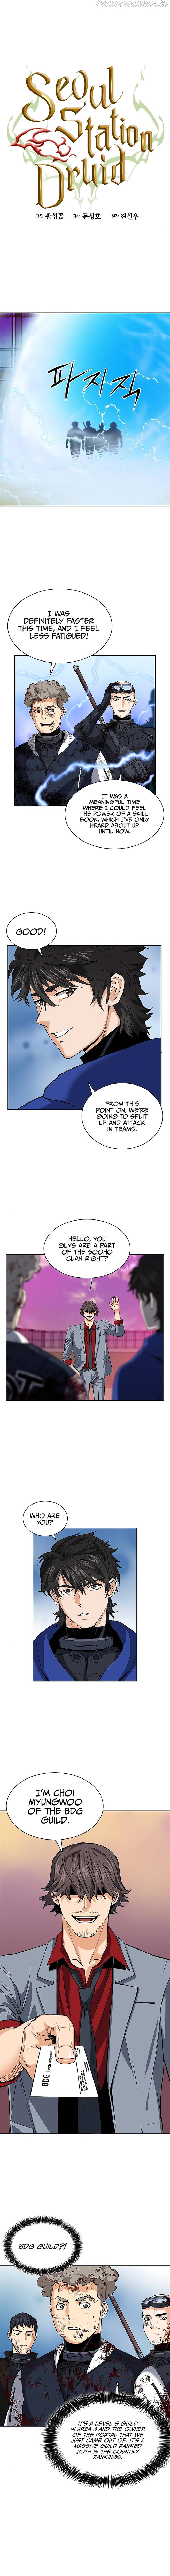 Seoul Station Druid Chapter 24 - Page 1